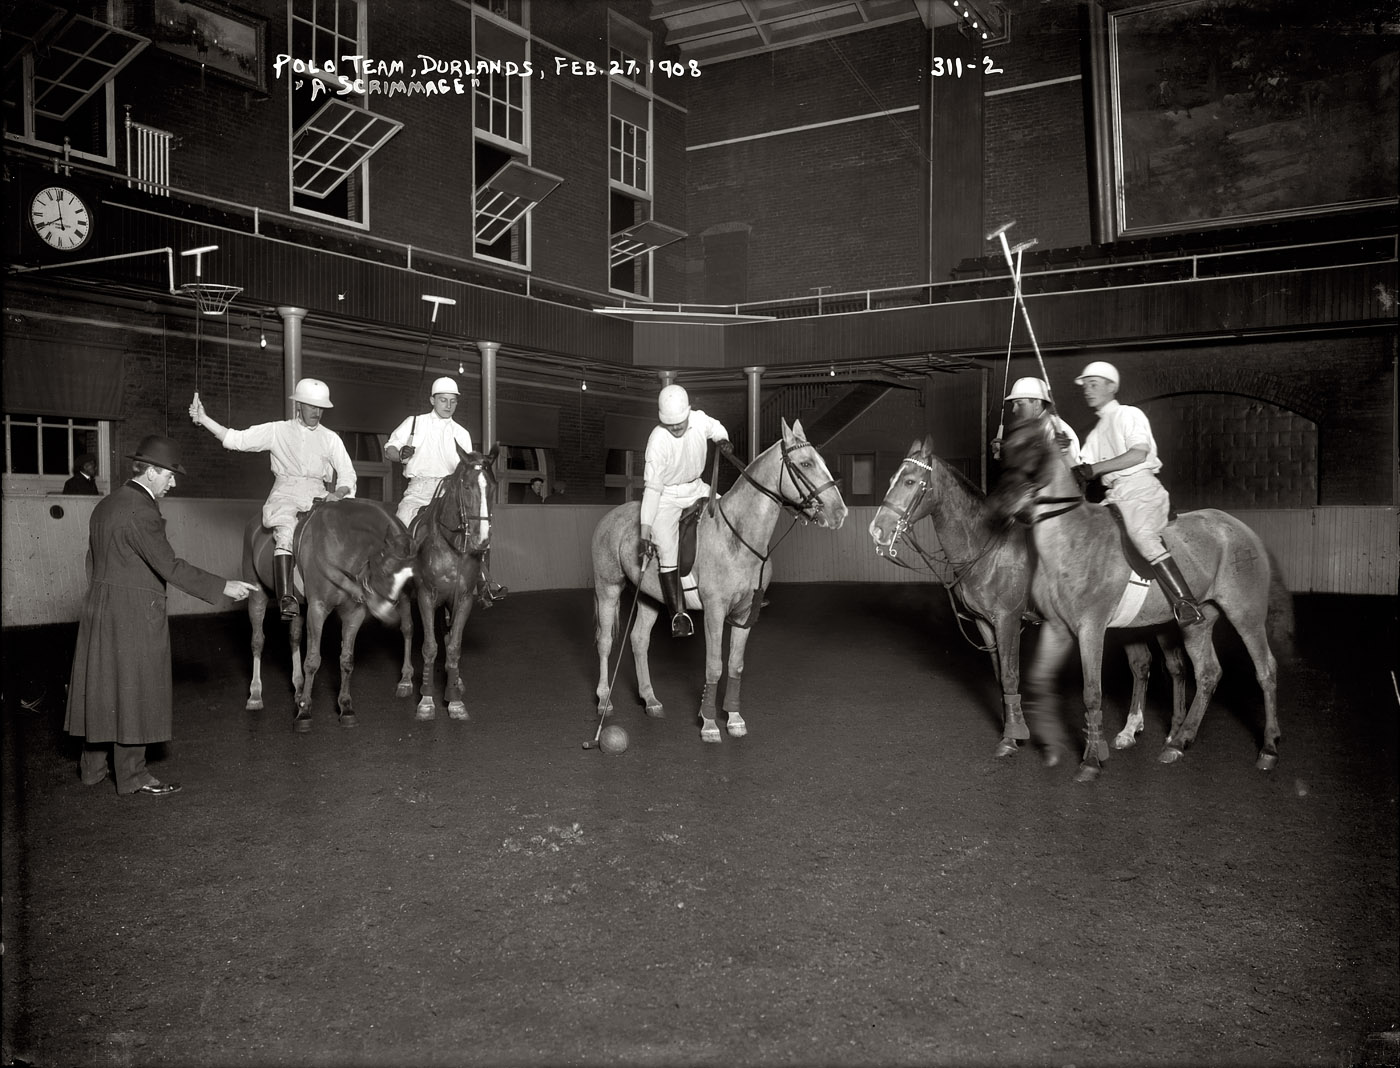 Feb. 27, 1908. "A scrimmage." Polo team at Durland's Riding Academy in New York. View full size. 8x10 glass negative, George Grantham Bain Collection.